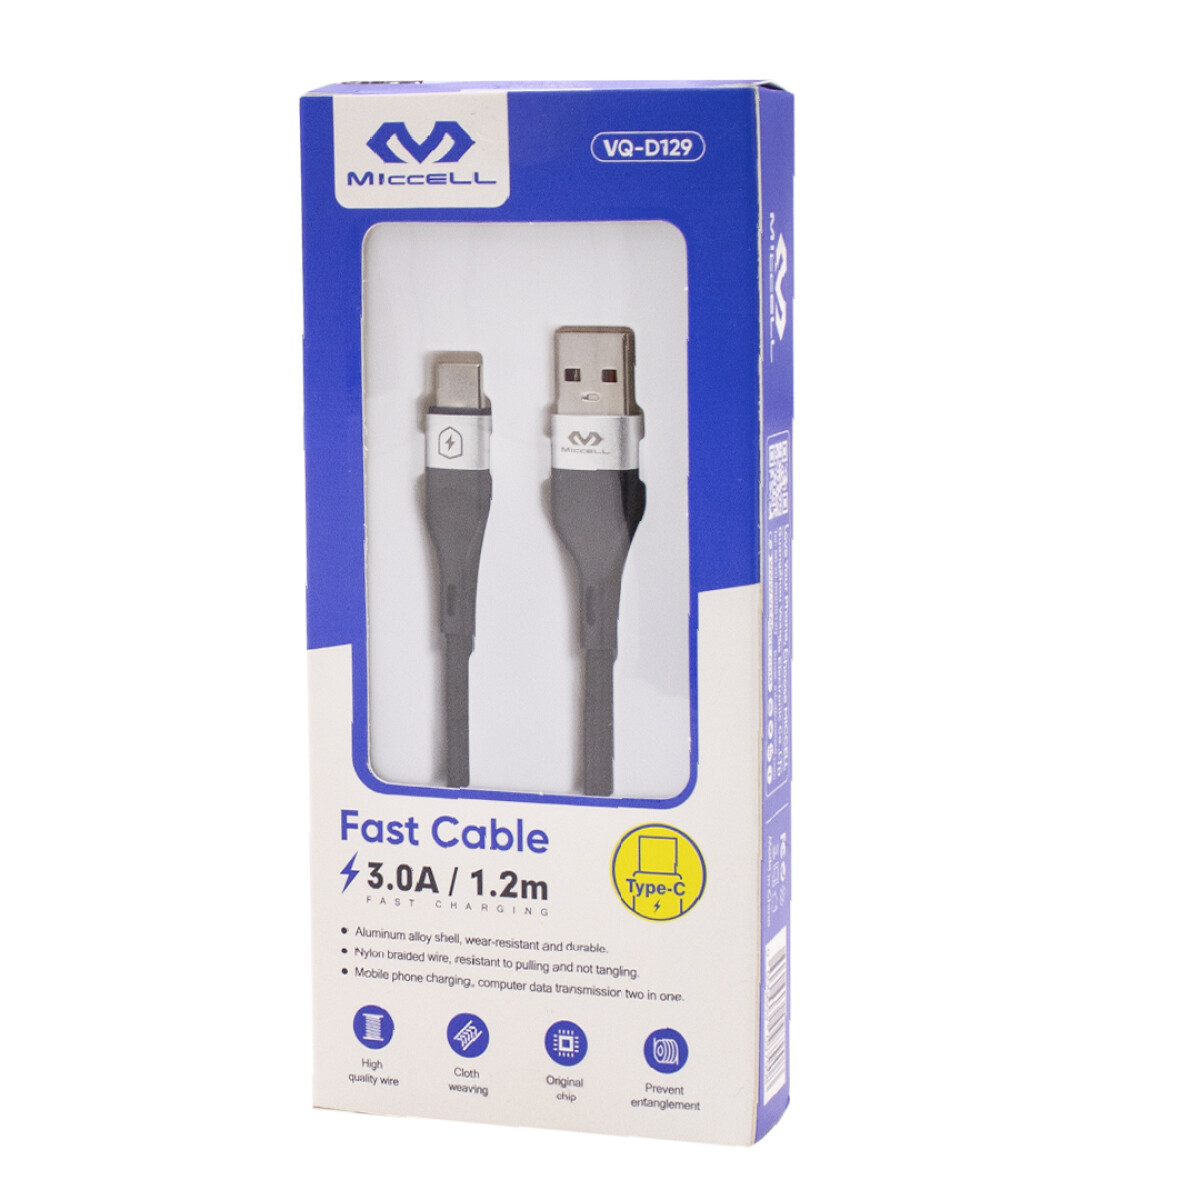 Cable Tipo C Miccell Vq-d129 3a 1.2m Negro Jtmicc013 